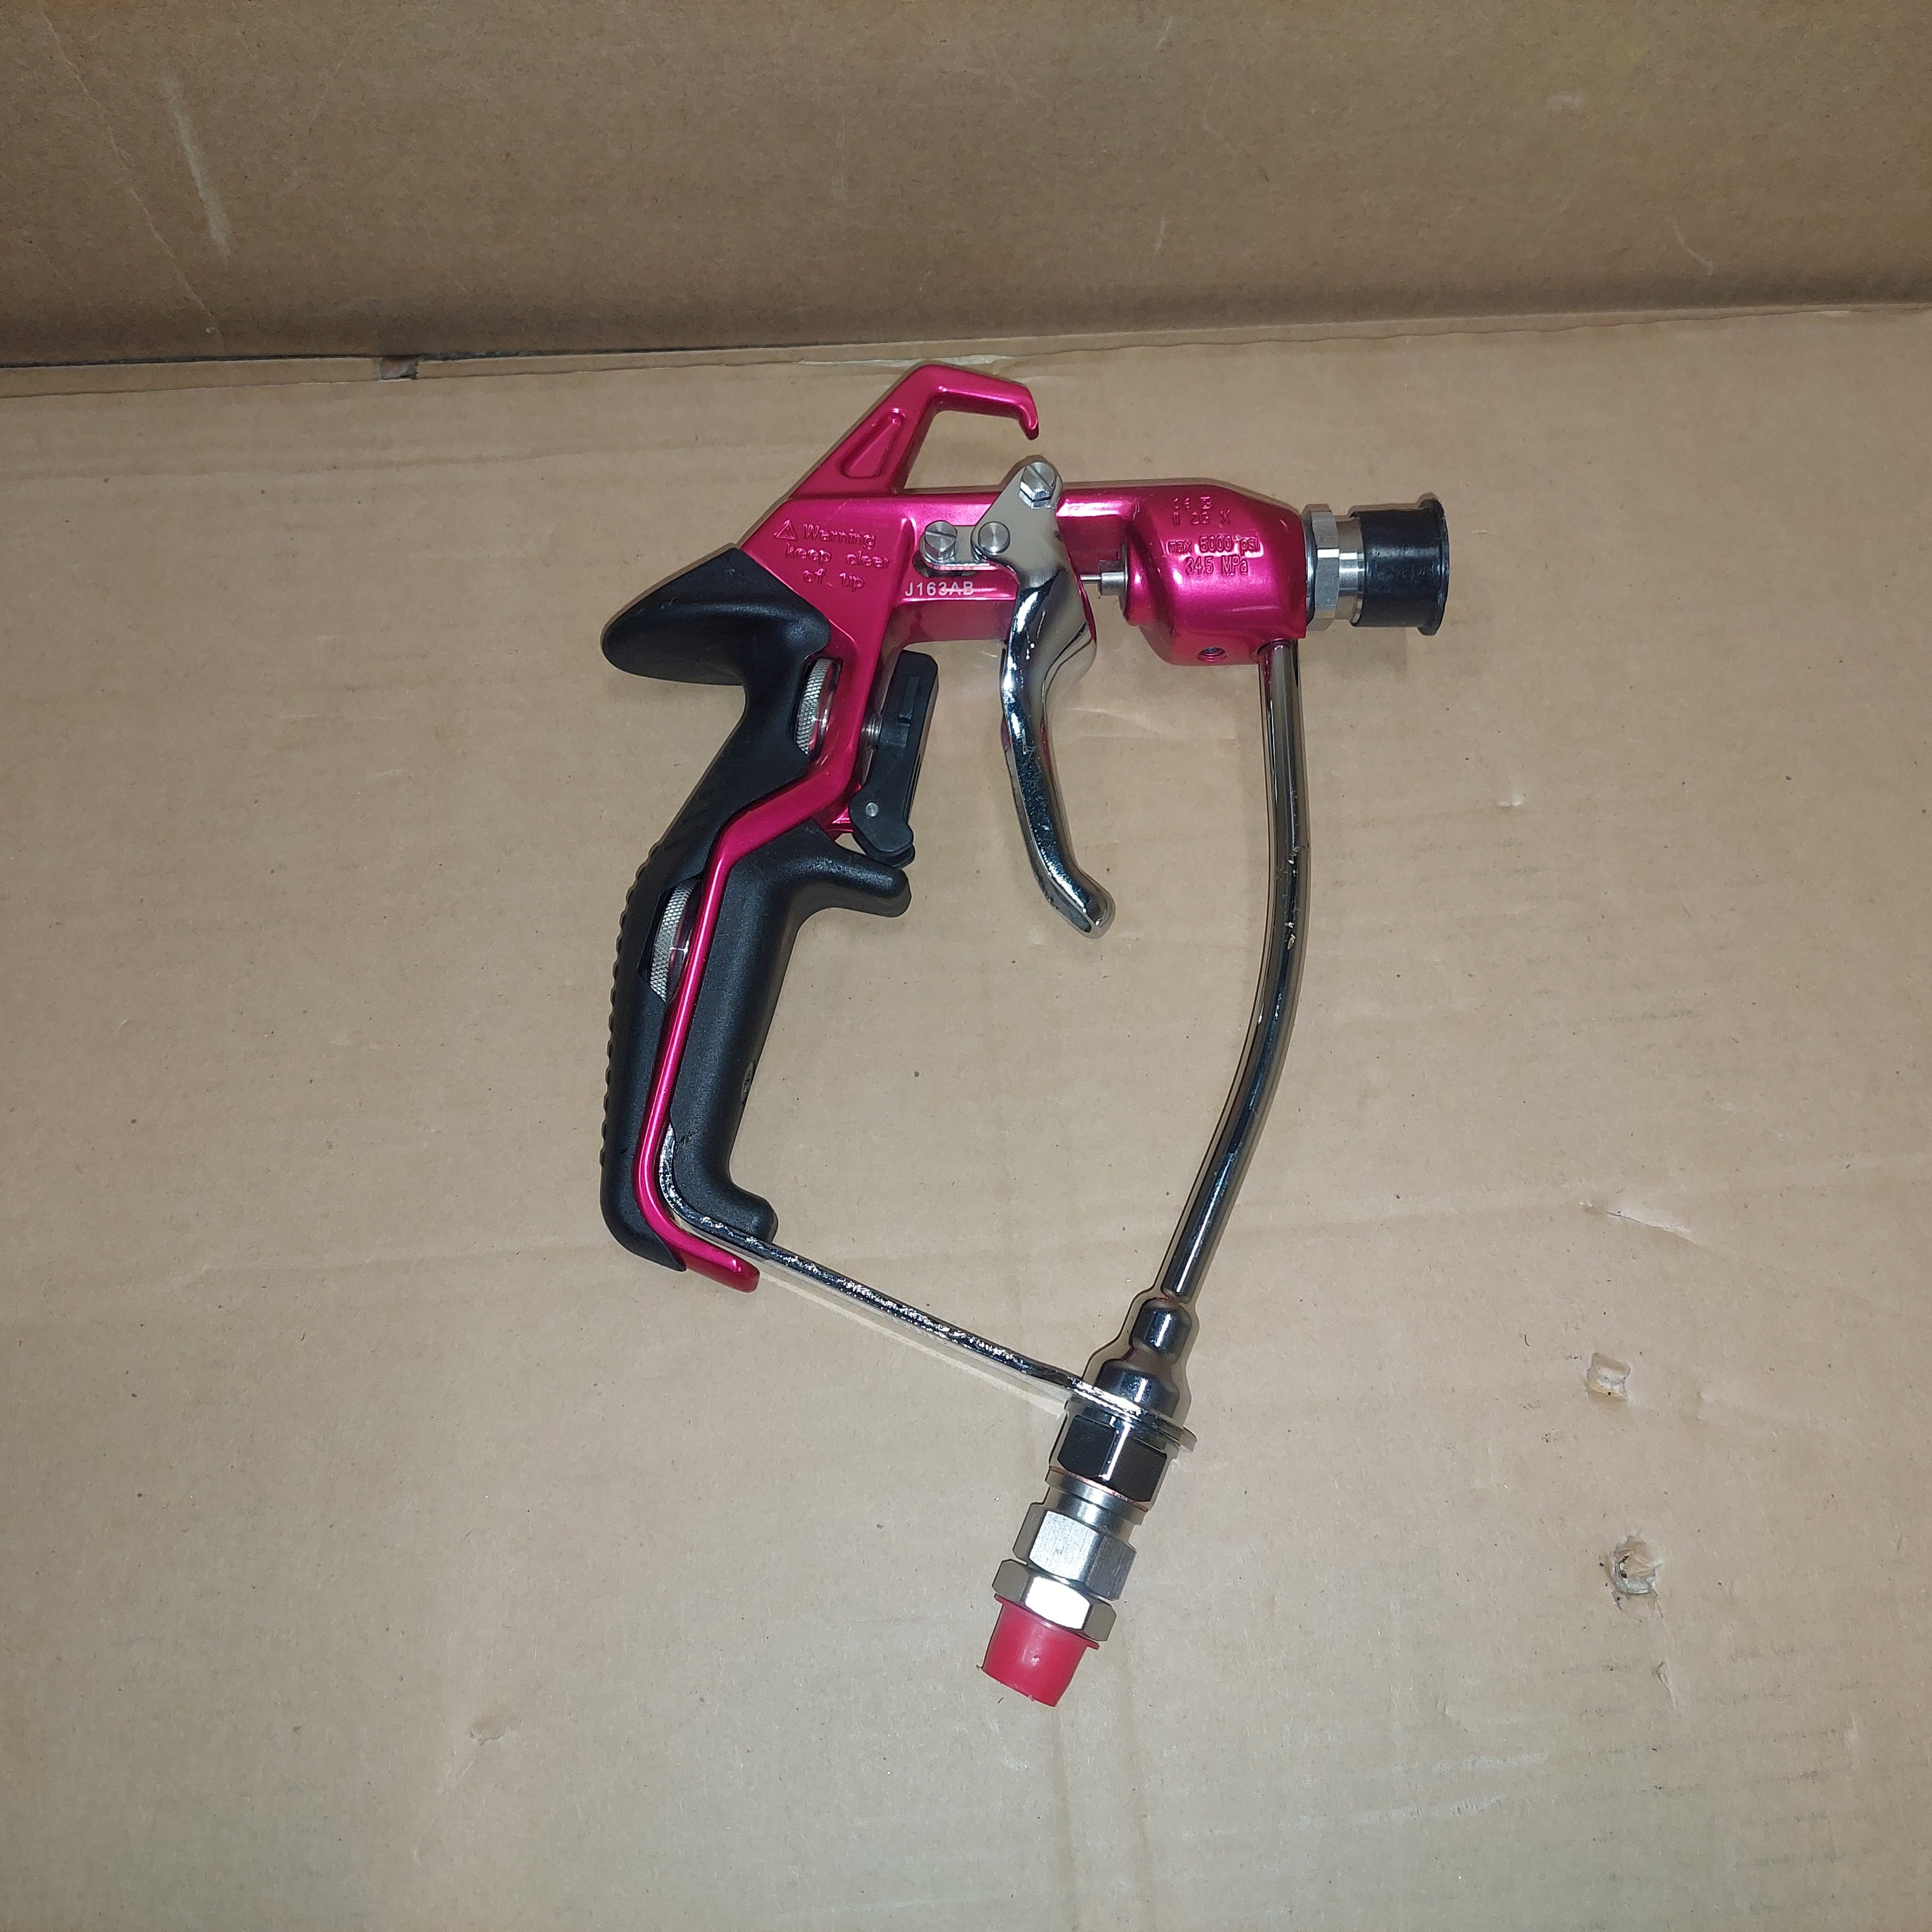 Airless 5,000 psi NON-Filtered Paint Gun NO TIPS J163AB New